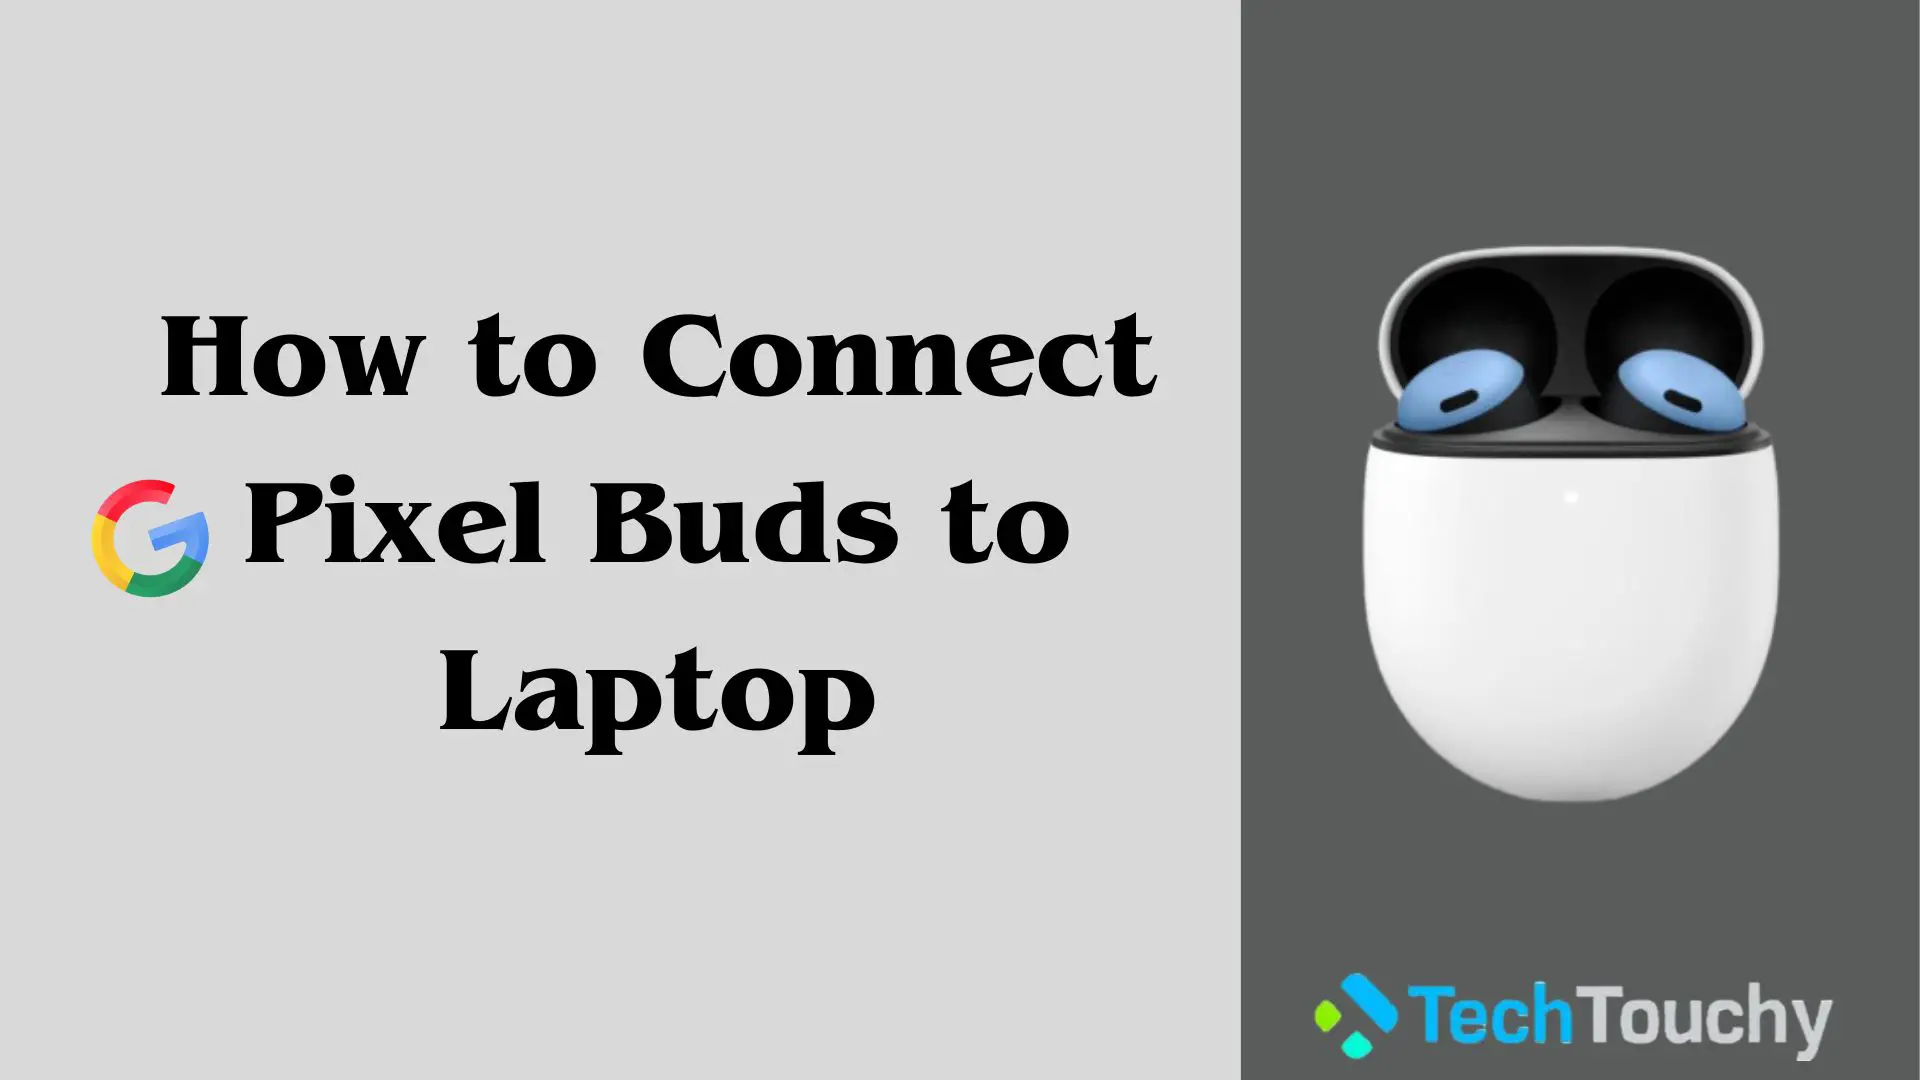 How to Connect Pixel Buds to Laptop